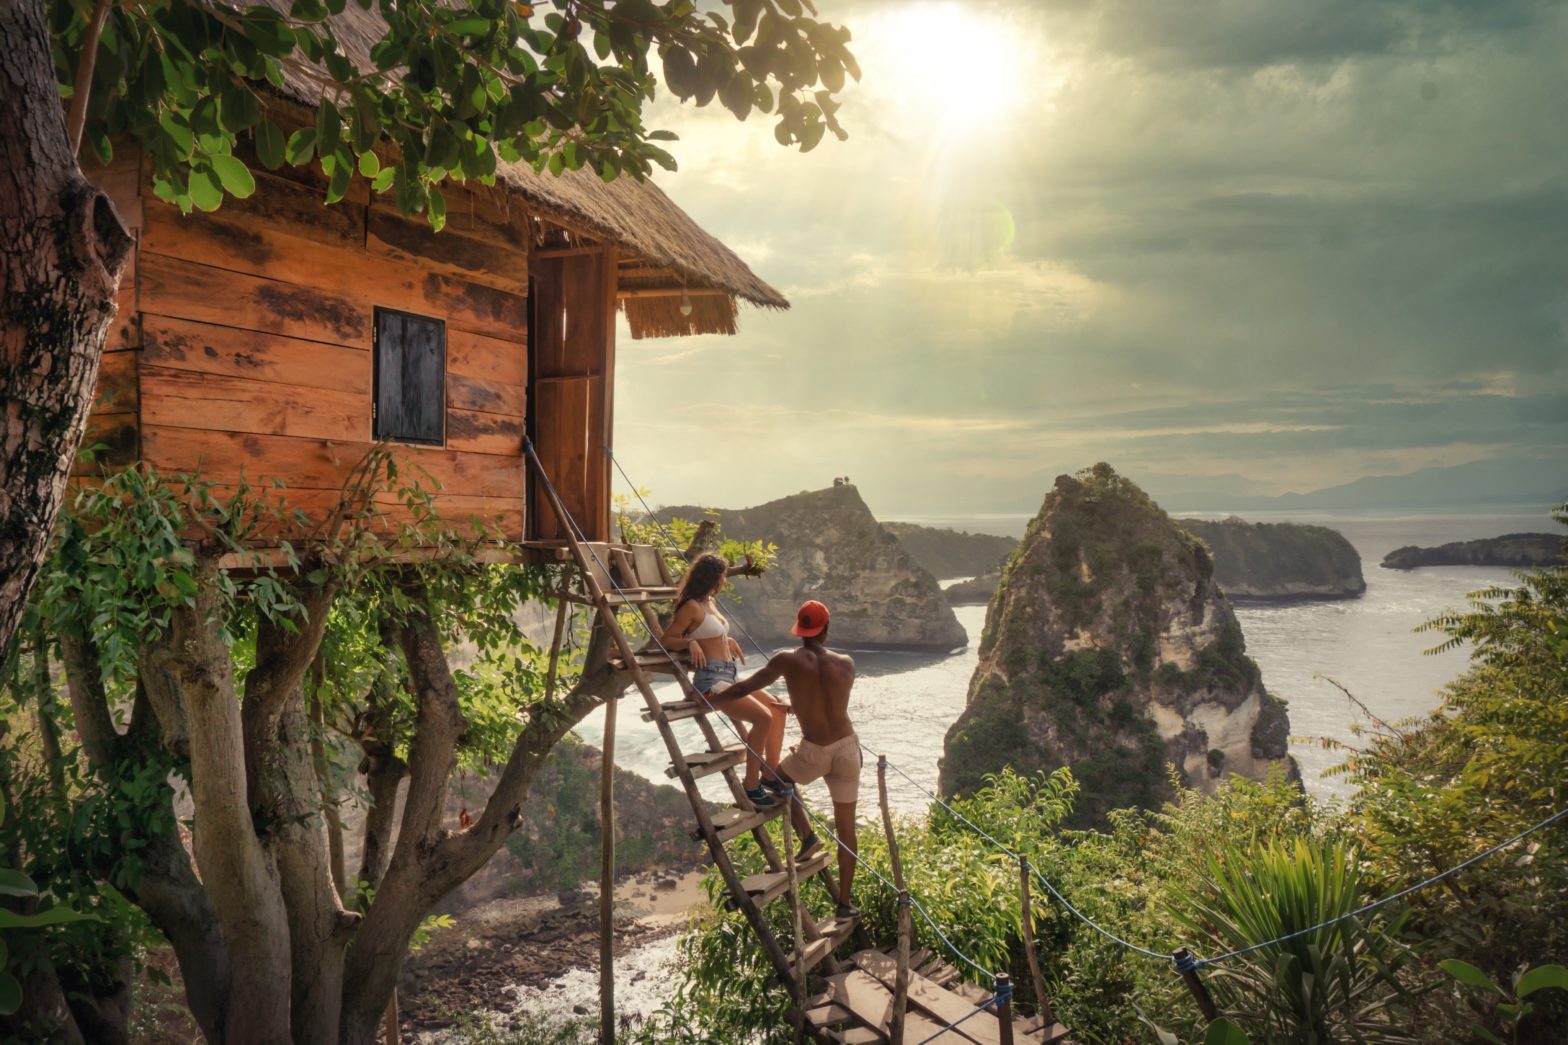 Bali Wants To Give Digital Nomads A "Second Home Visa"